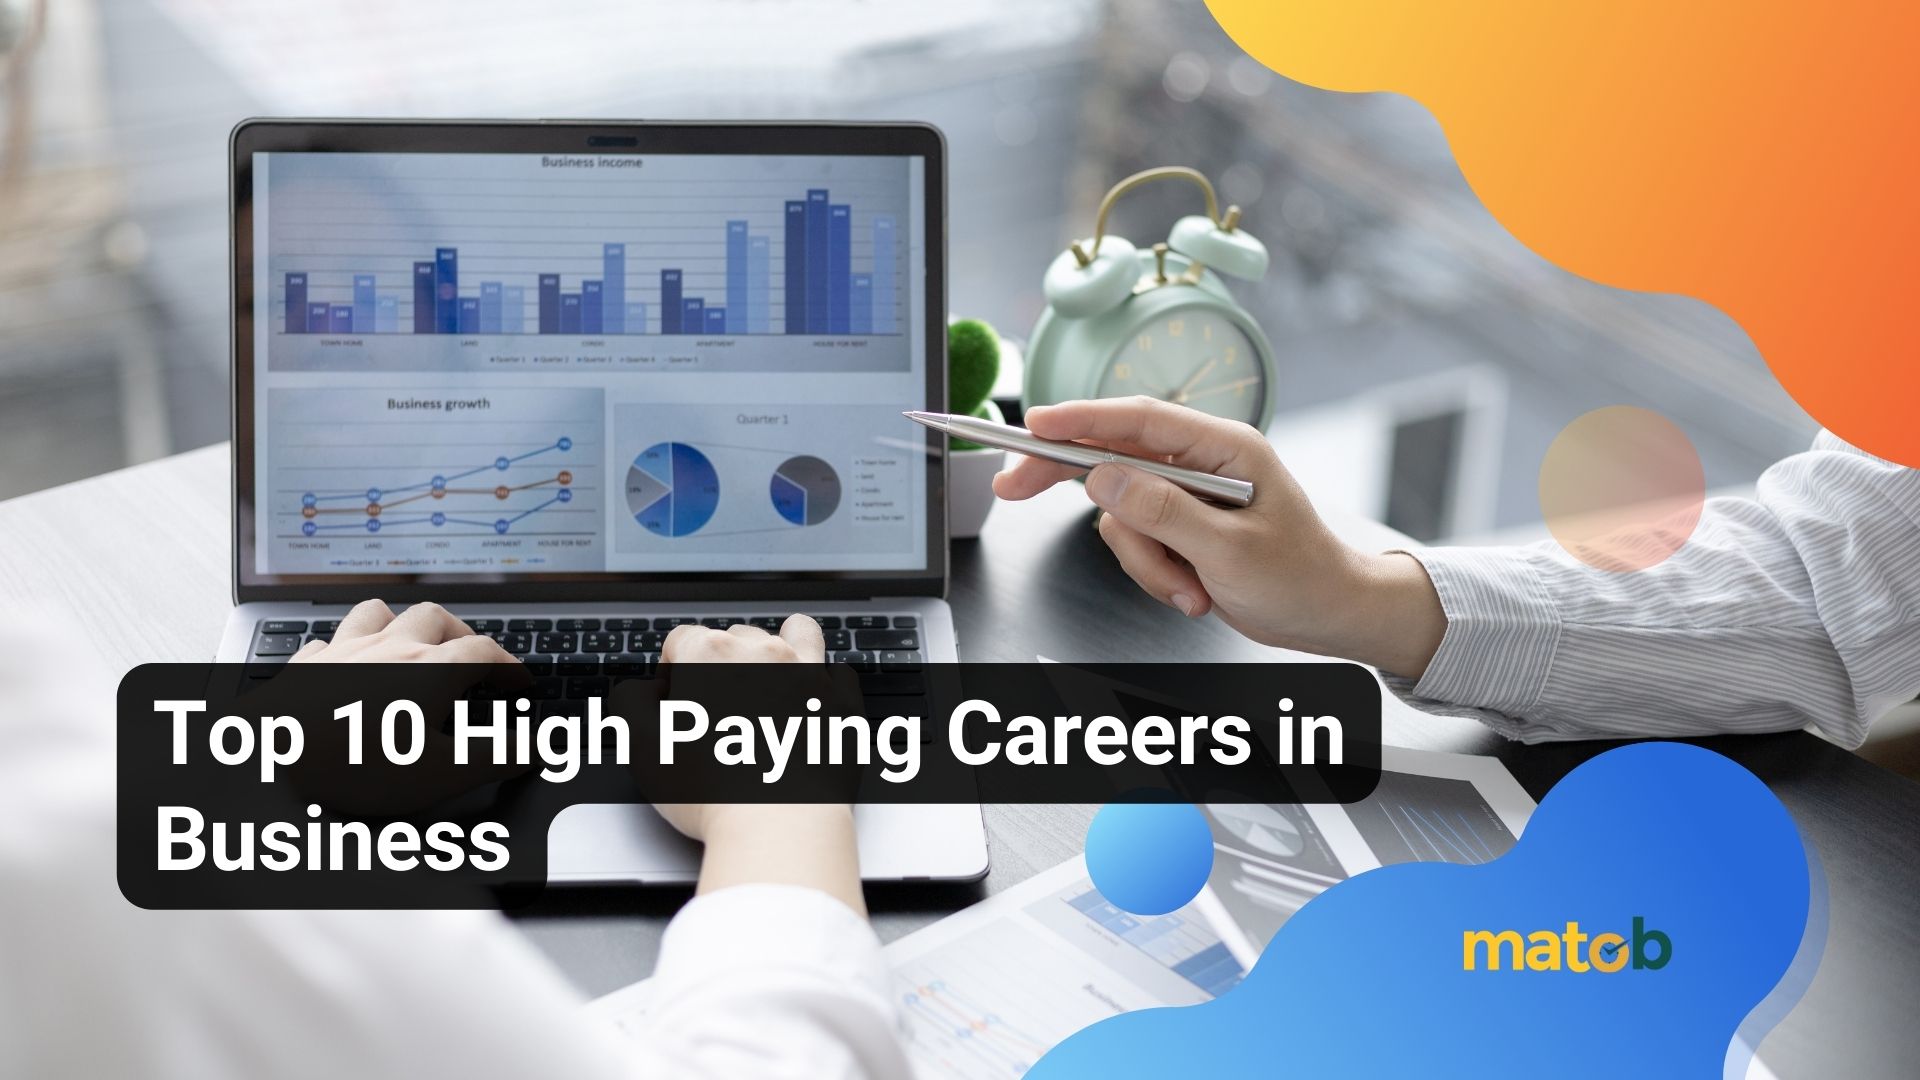 Top 10 High Paying Careers in Business